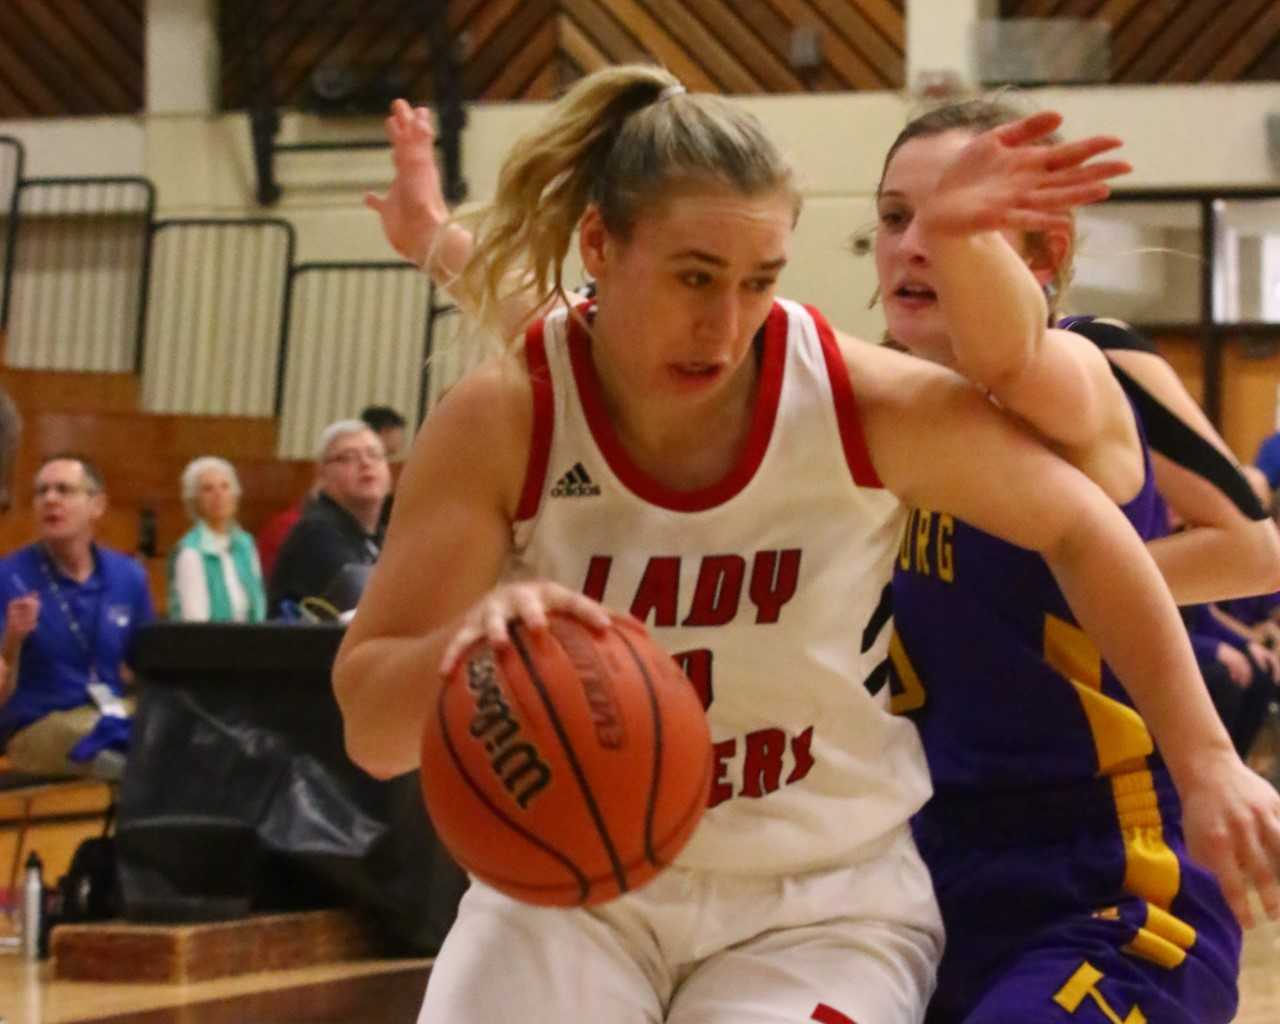 Clatskanie's Shelby Blodgett had 18 points and 15 rebounds Thursday against Harrisburg. (NW Sports Photography)